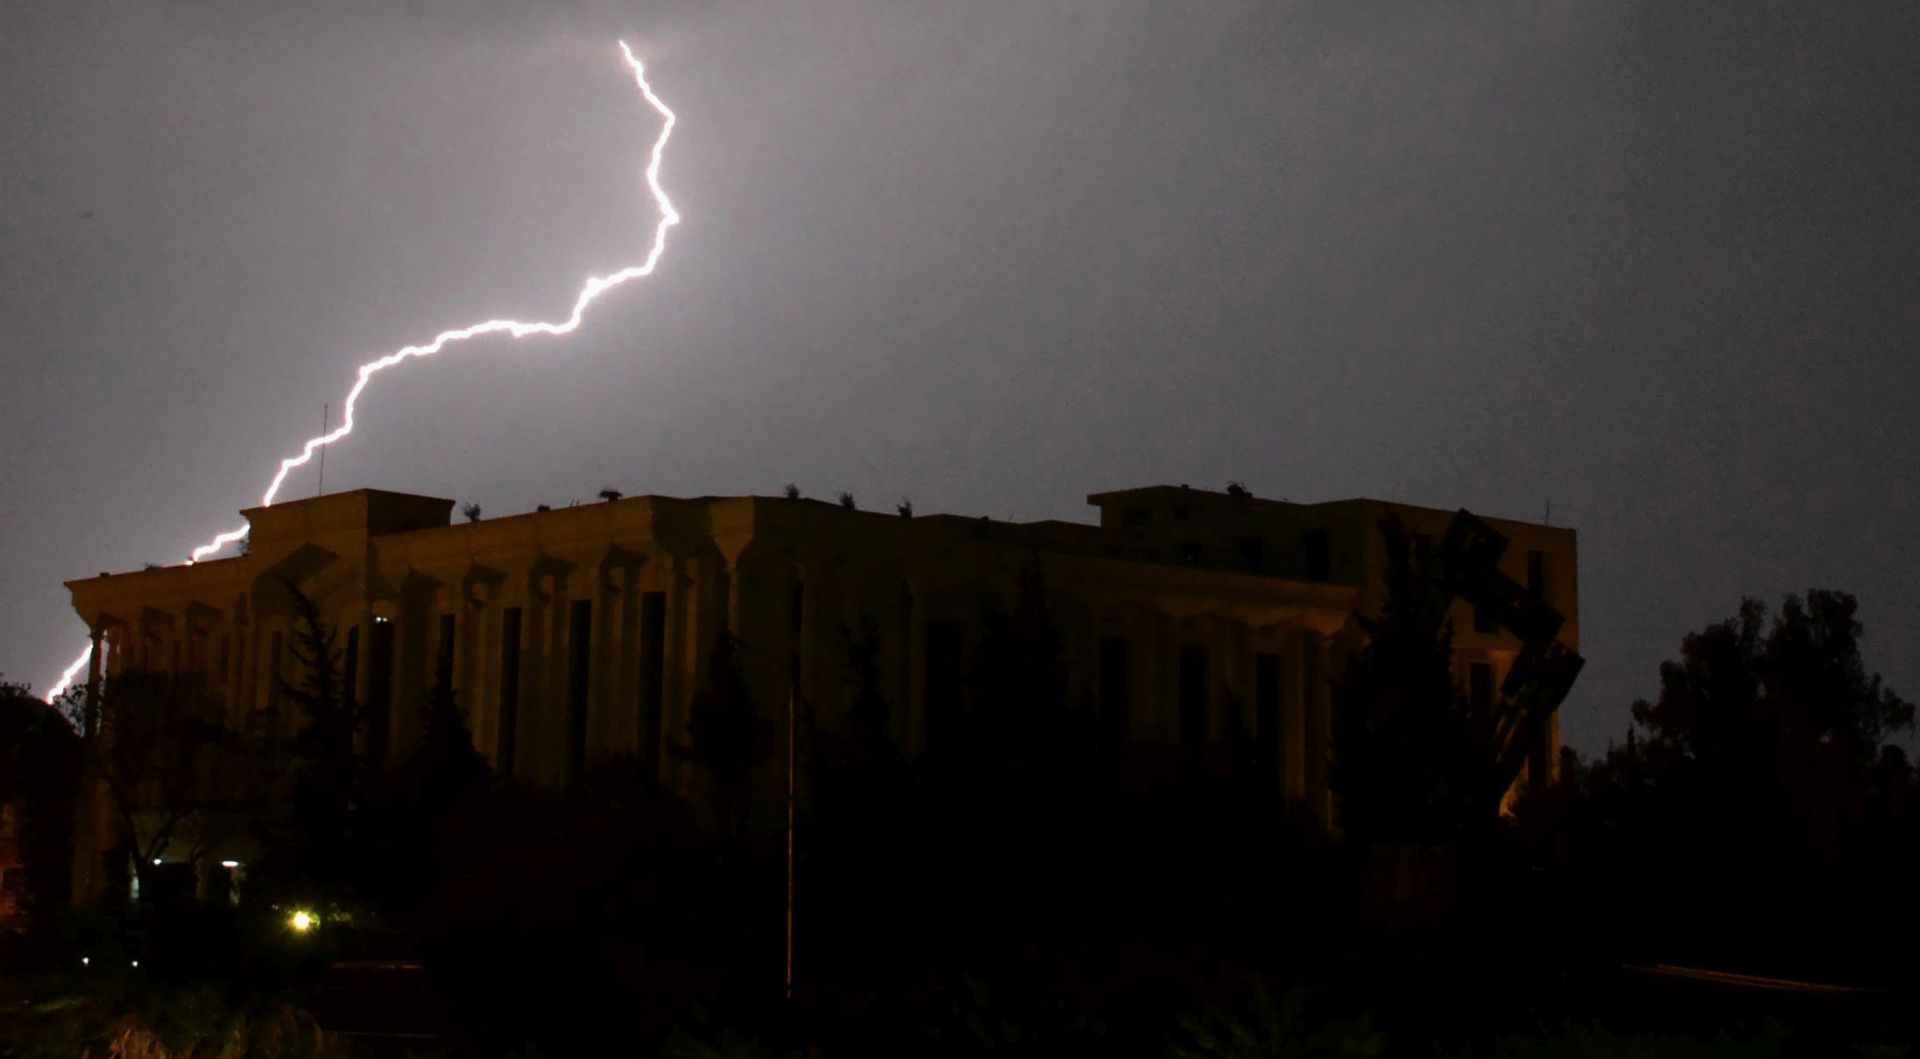 epa04684040 A view of a lightening strike during an evening thunder storm, in Islamabad, Pakistan 28 March 2015.  EPA/SOHAIL SHAHZAD